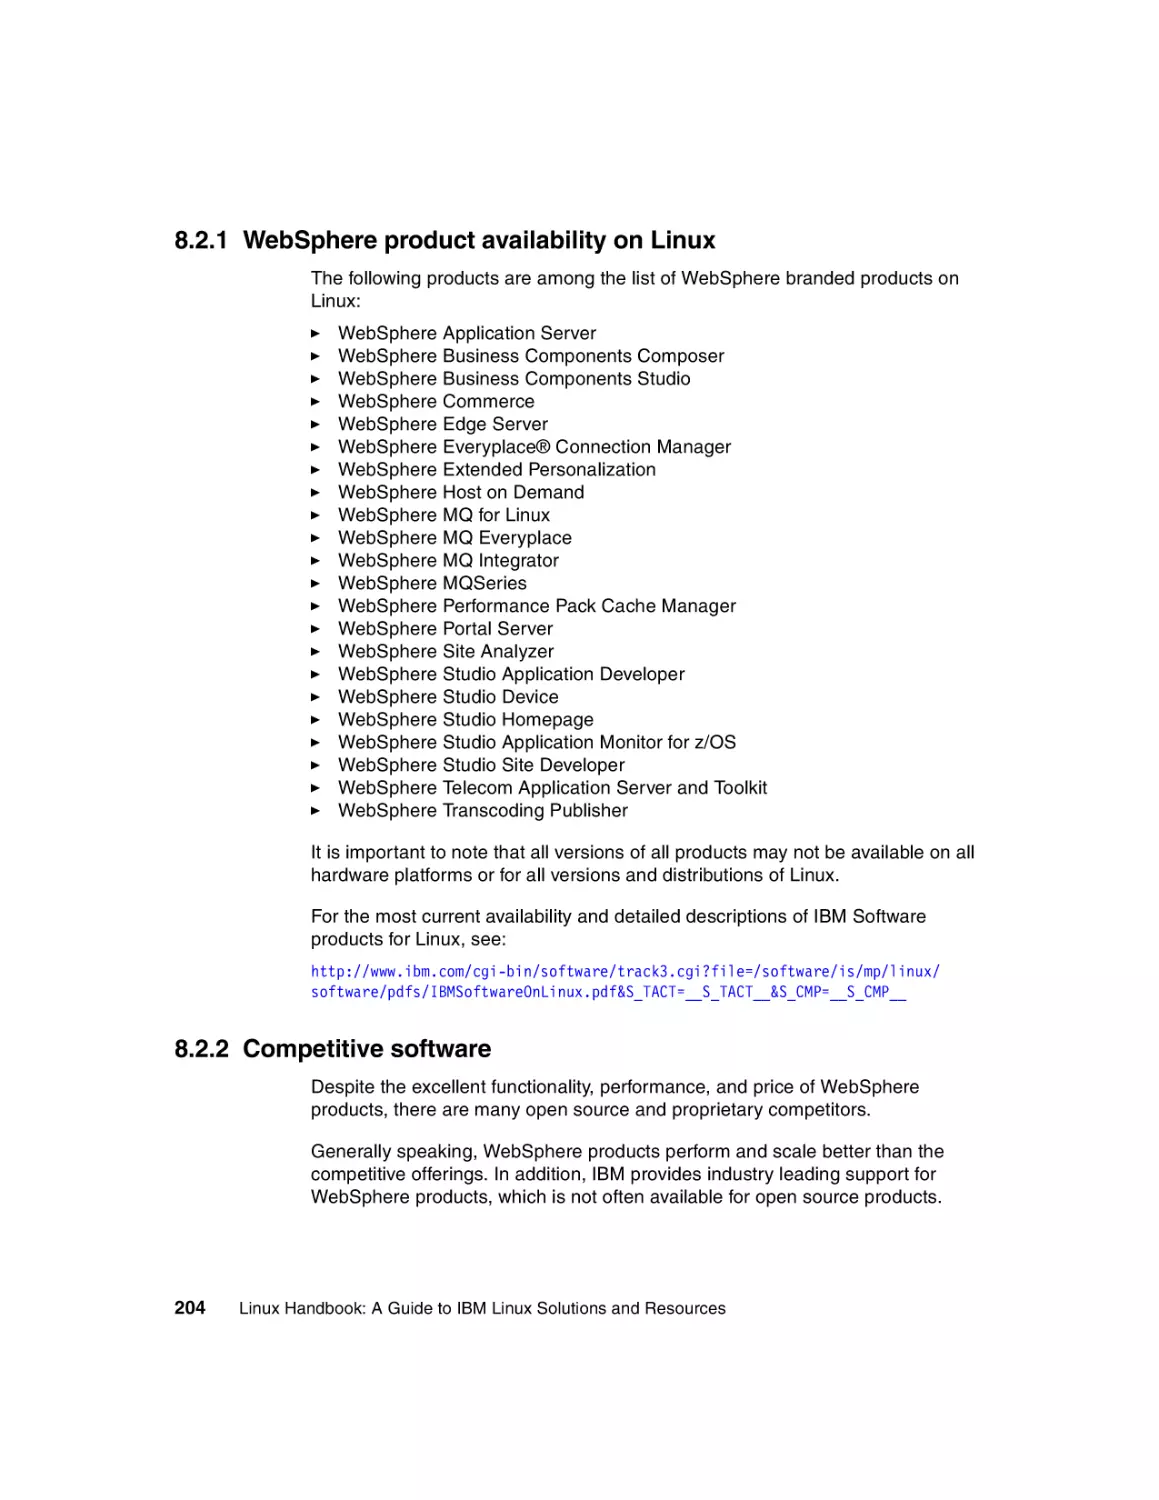 8.2.1 WebSphere product availability on Linux
8.2.2 Competitive software